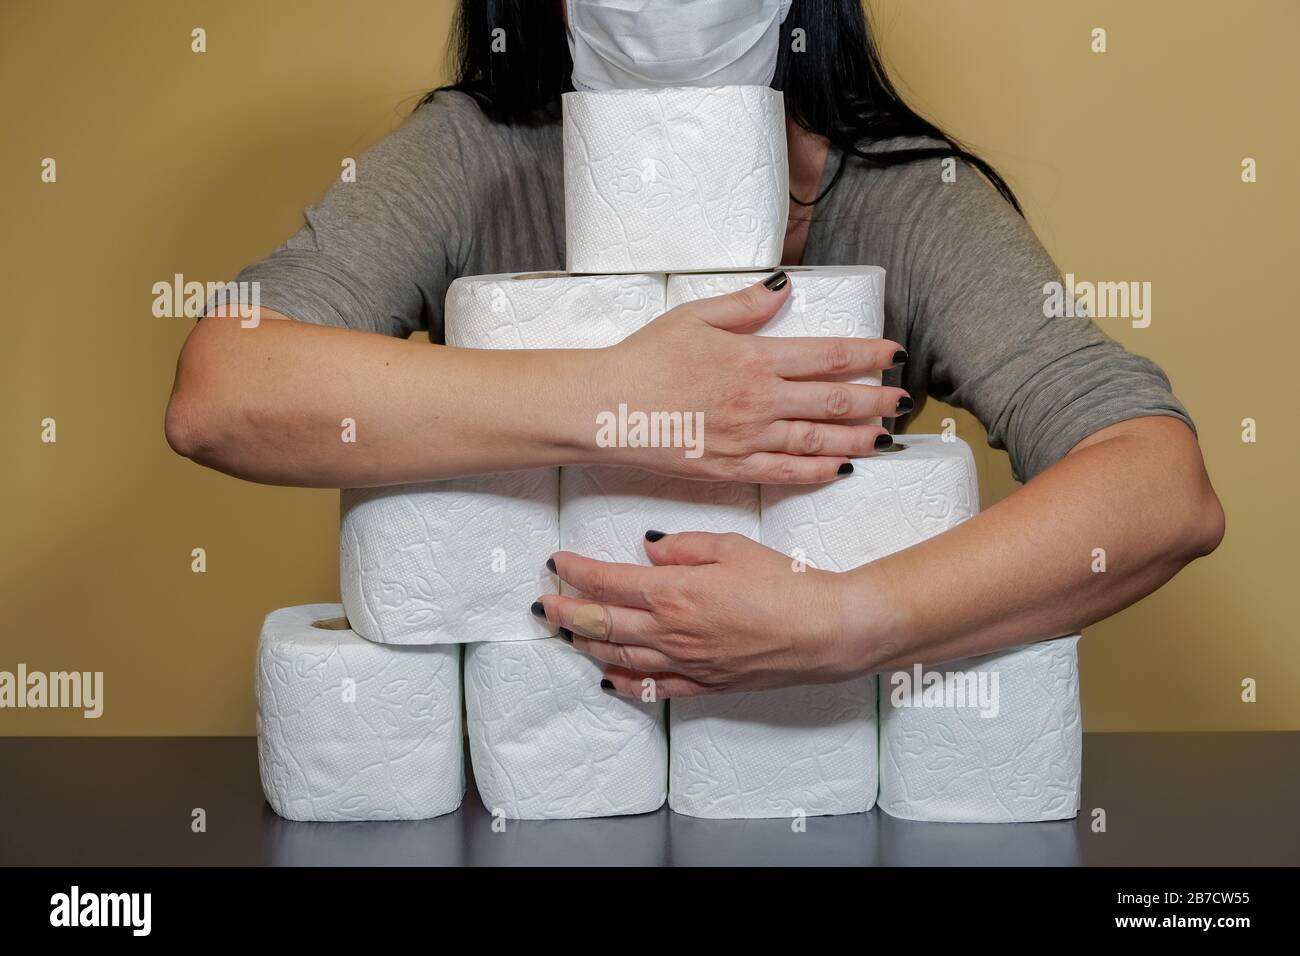 Toilet paper shortage concept with female holding rolls. Woman covers with her hands a pile of white rolls to illustrate the issue of out of stock loo Stock Photo